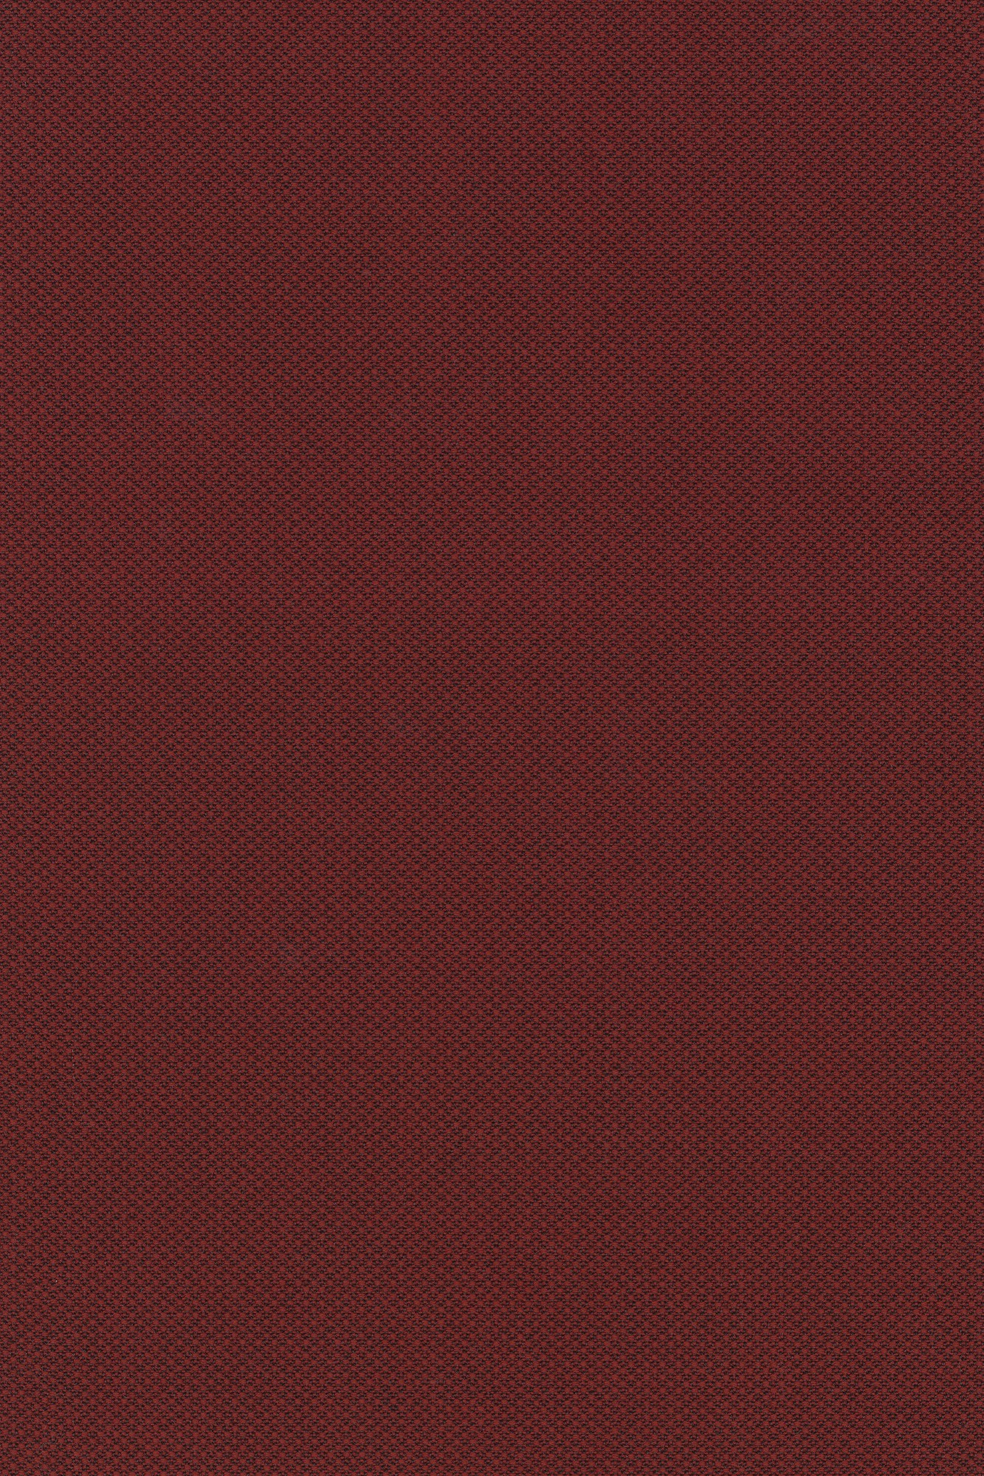 Fabric sample Fiord 581 red